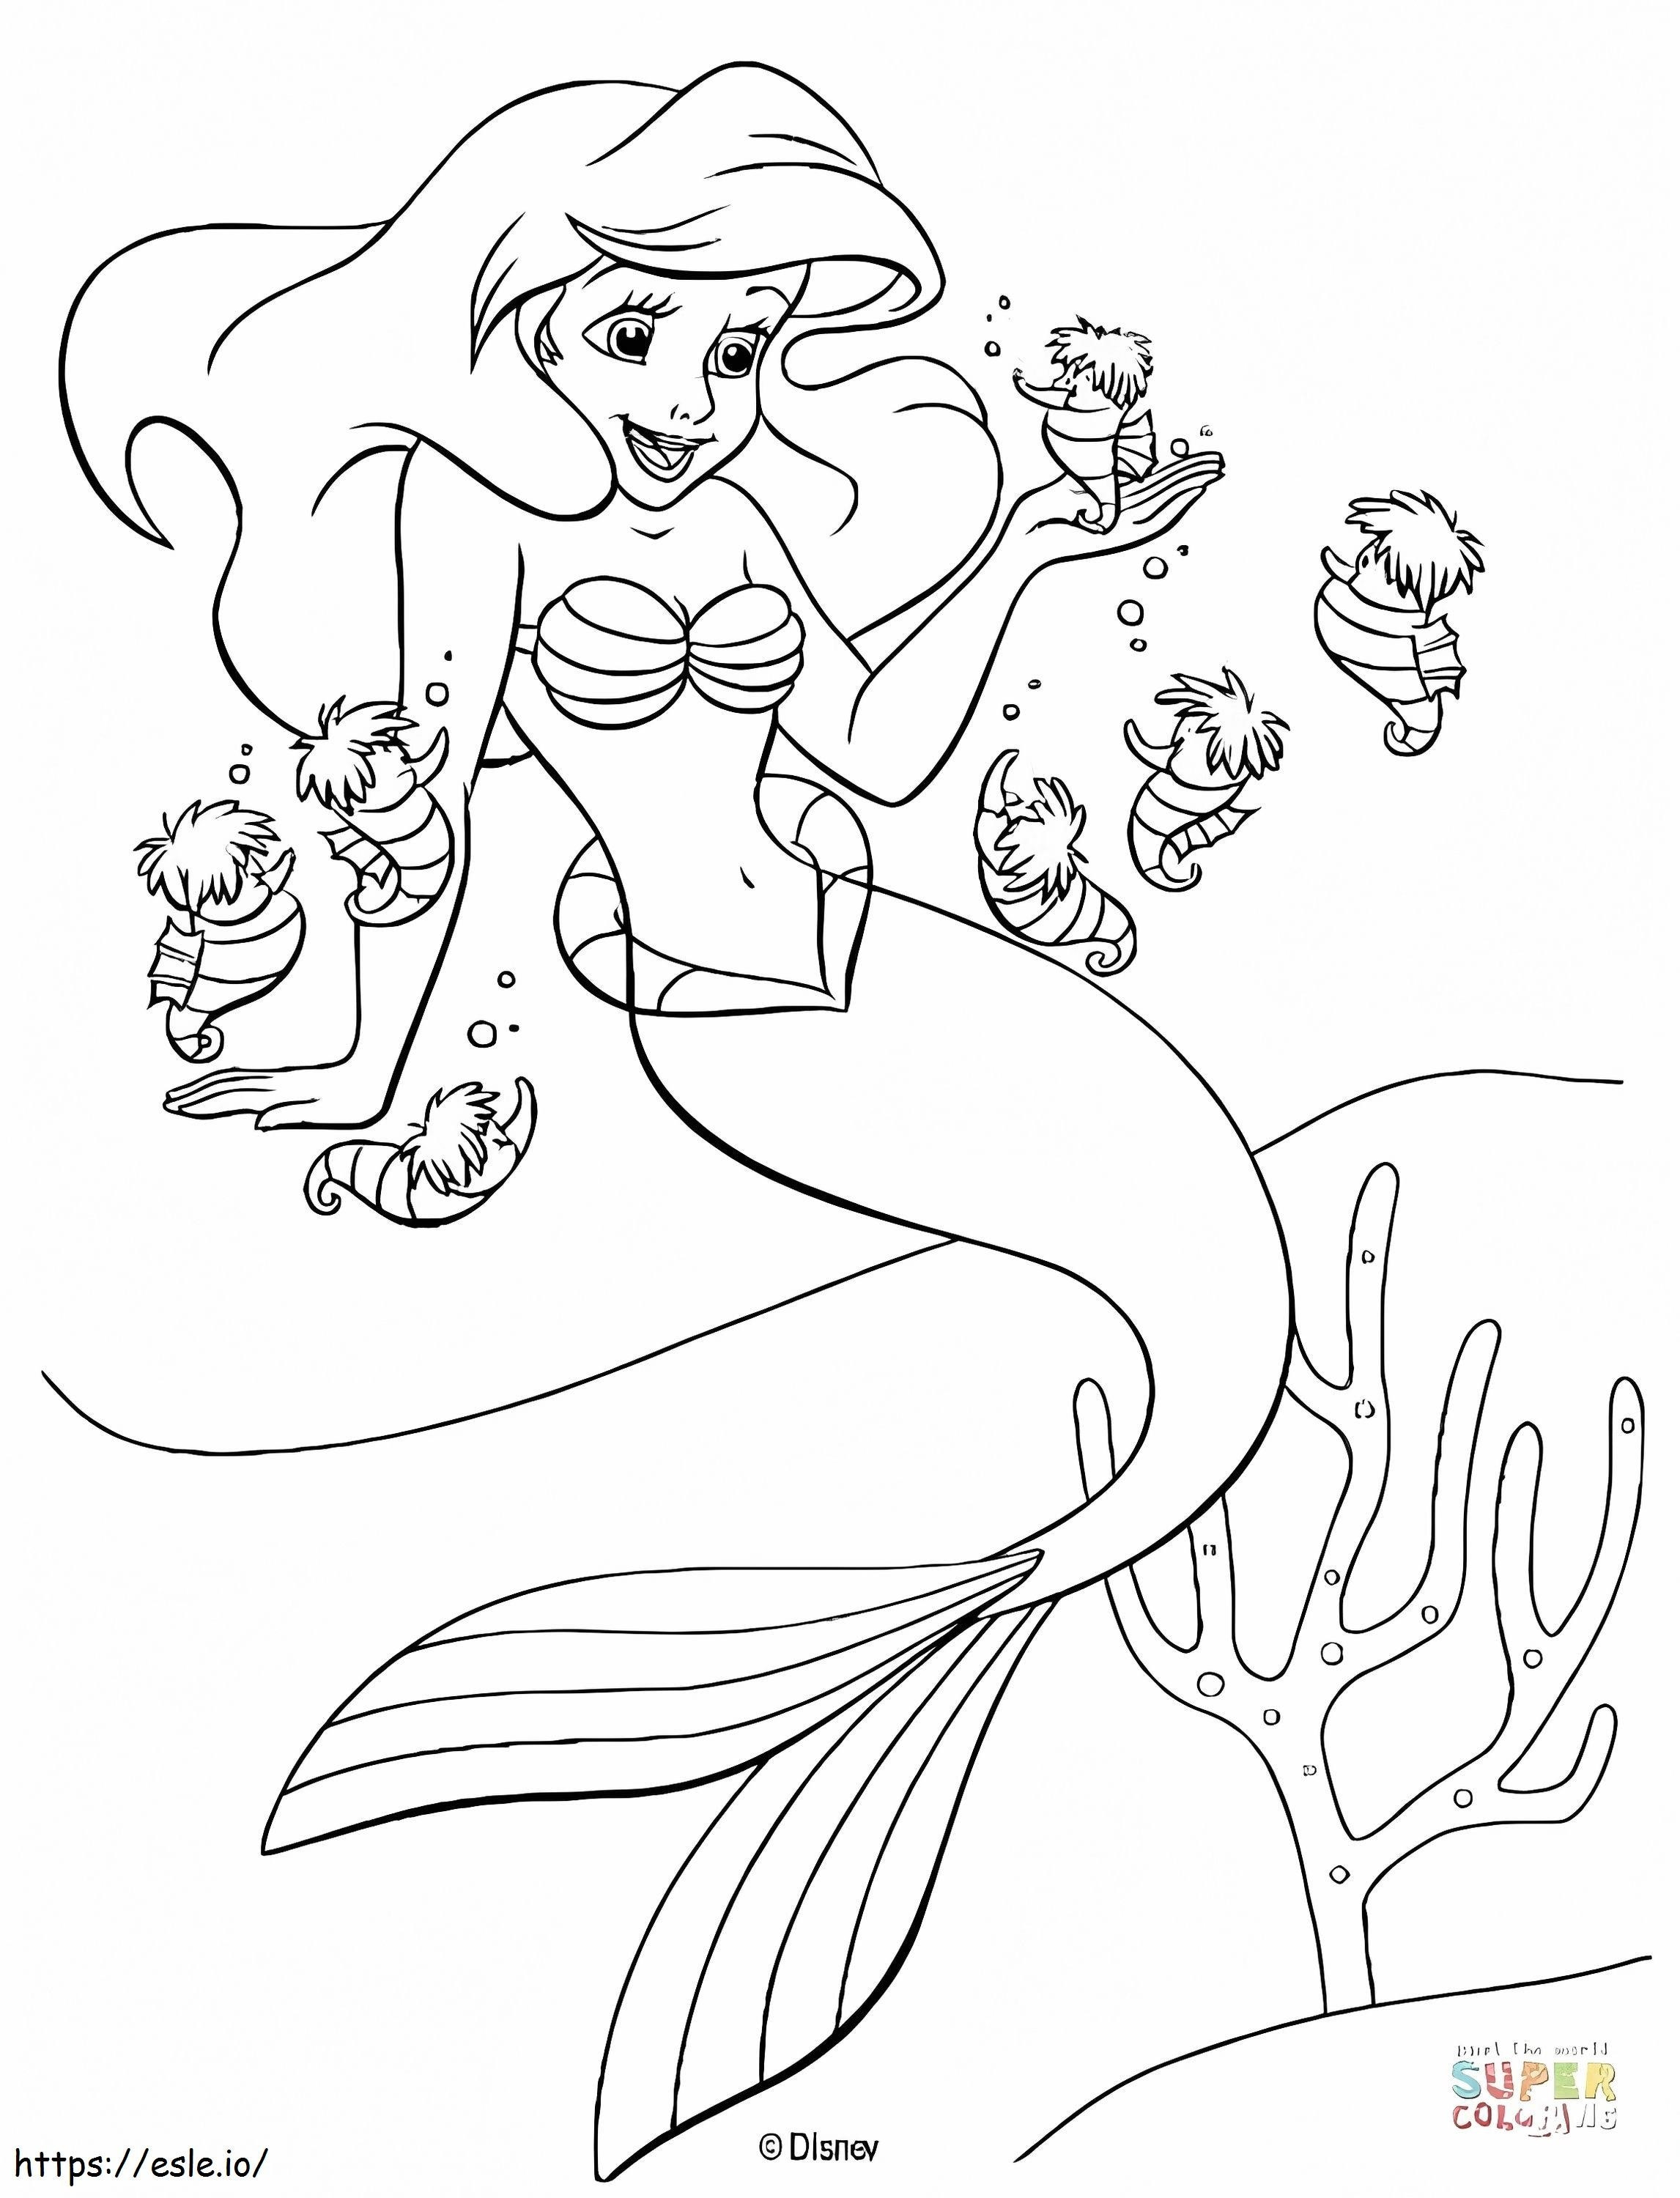 1528250567_Ariel And Seahorses coloring page